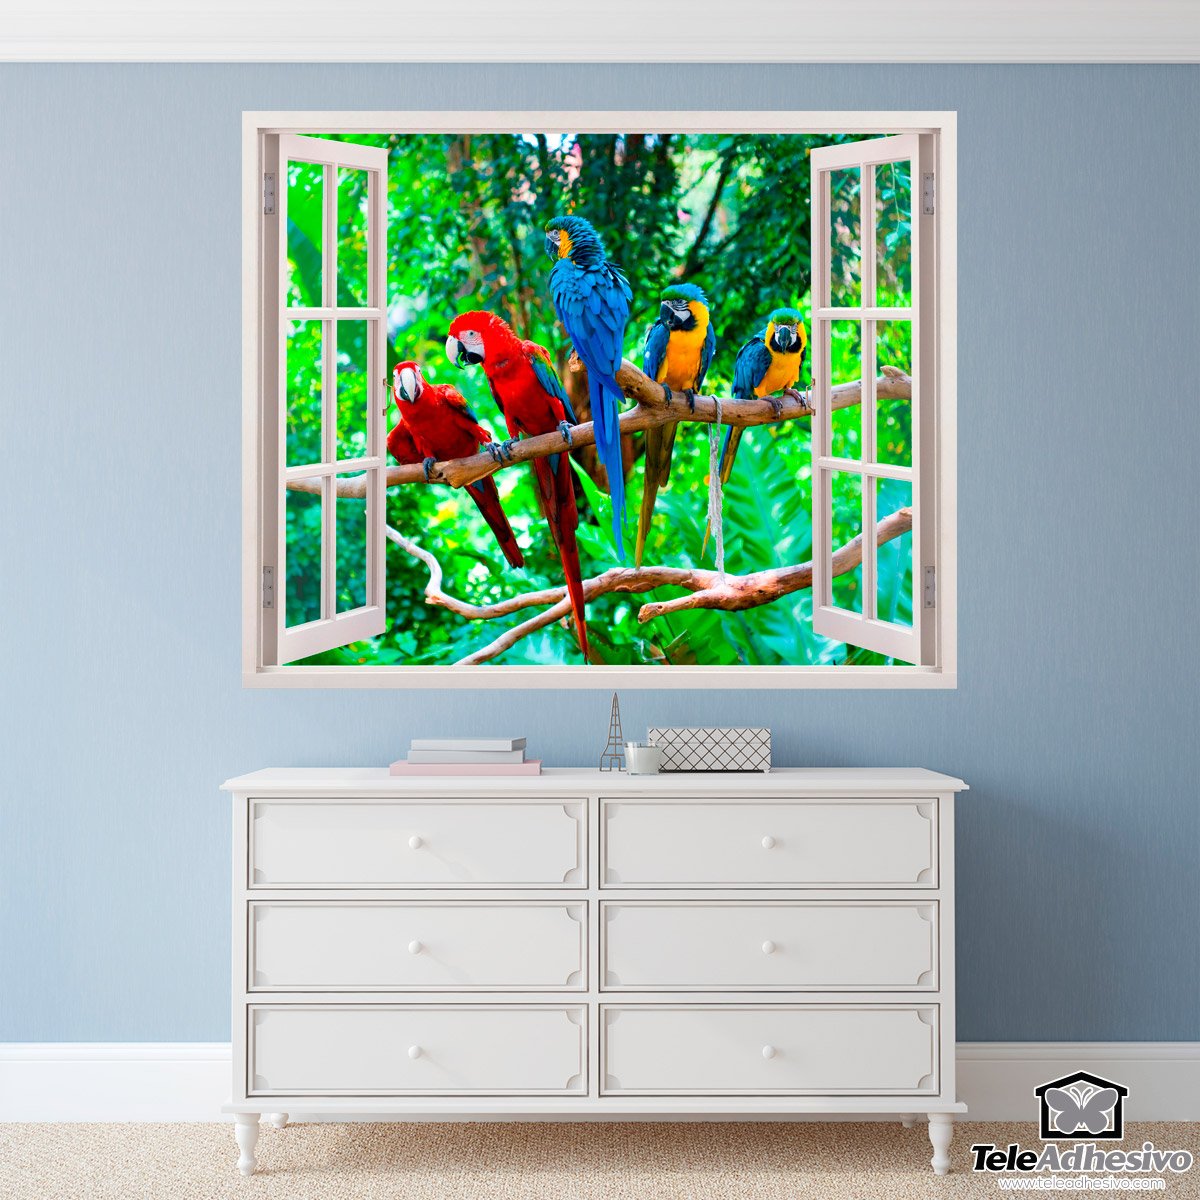 Wall Stickers: Parrots